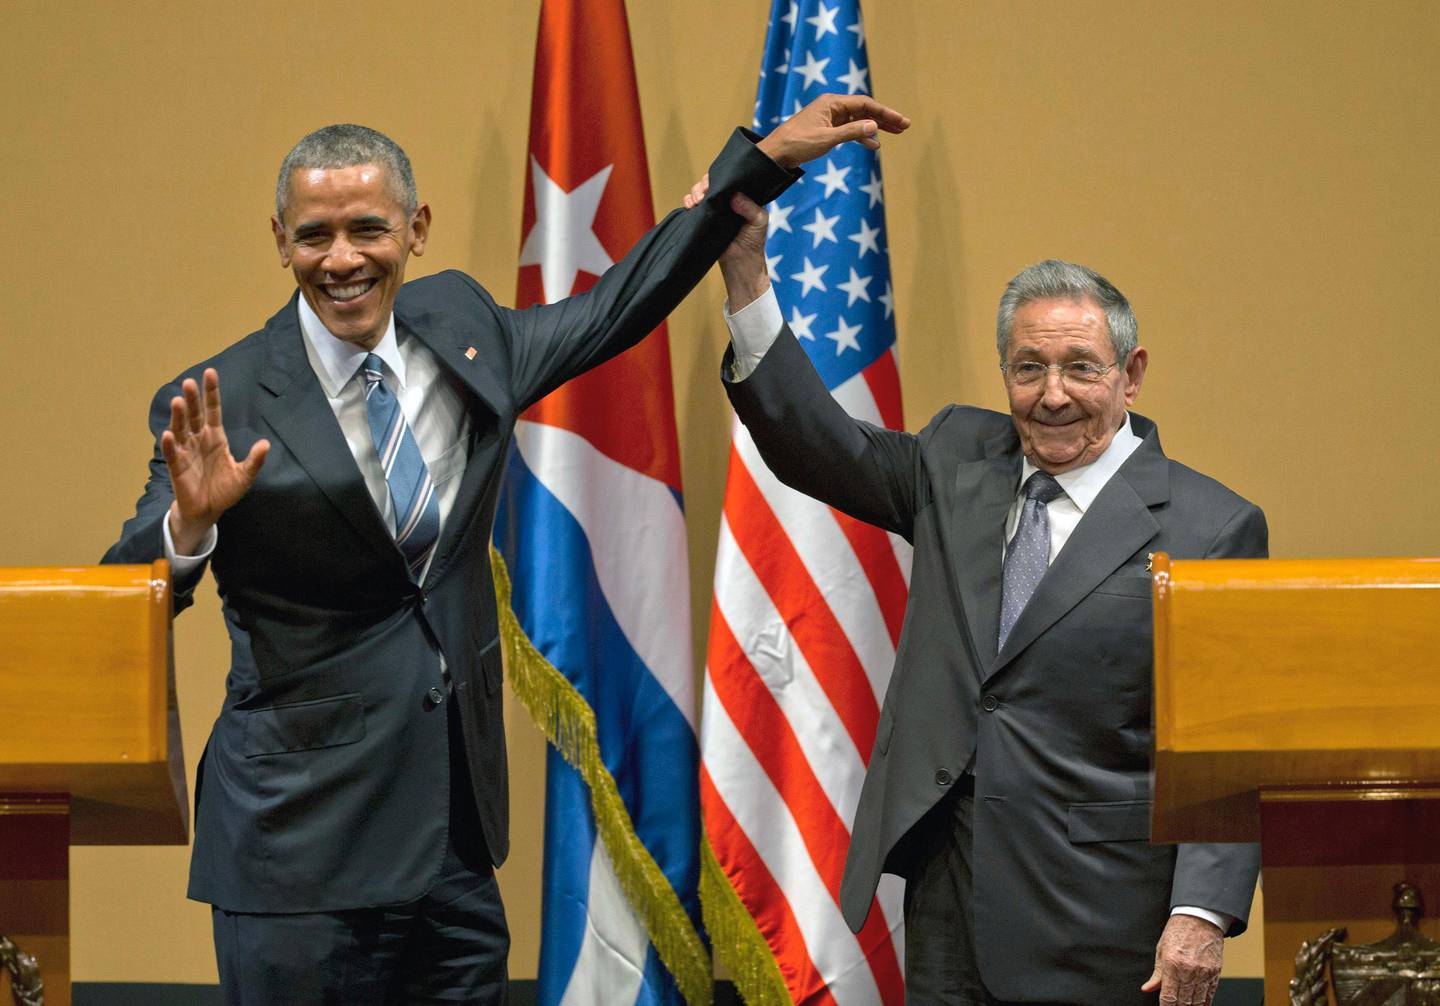 FILE - In this March 21, 2016 file photo, Cuban President Raul Castro, right, lifts up the arm of U.S. President Barack Obama, at the conclusion of their joint news conference at the Palace of the Revolution, in Havana, Cuba. Obama was joined by wife Michelle Obama and daughters Malia and Sasha in the first visit by a sitting U.S. president to the island nation in 88 years. (AP Photo/Ramon Espinosa, File)